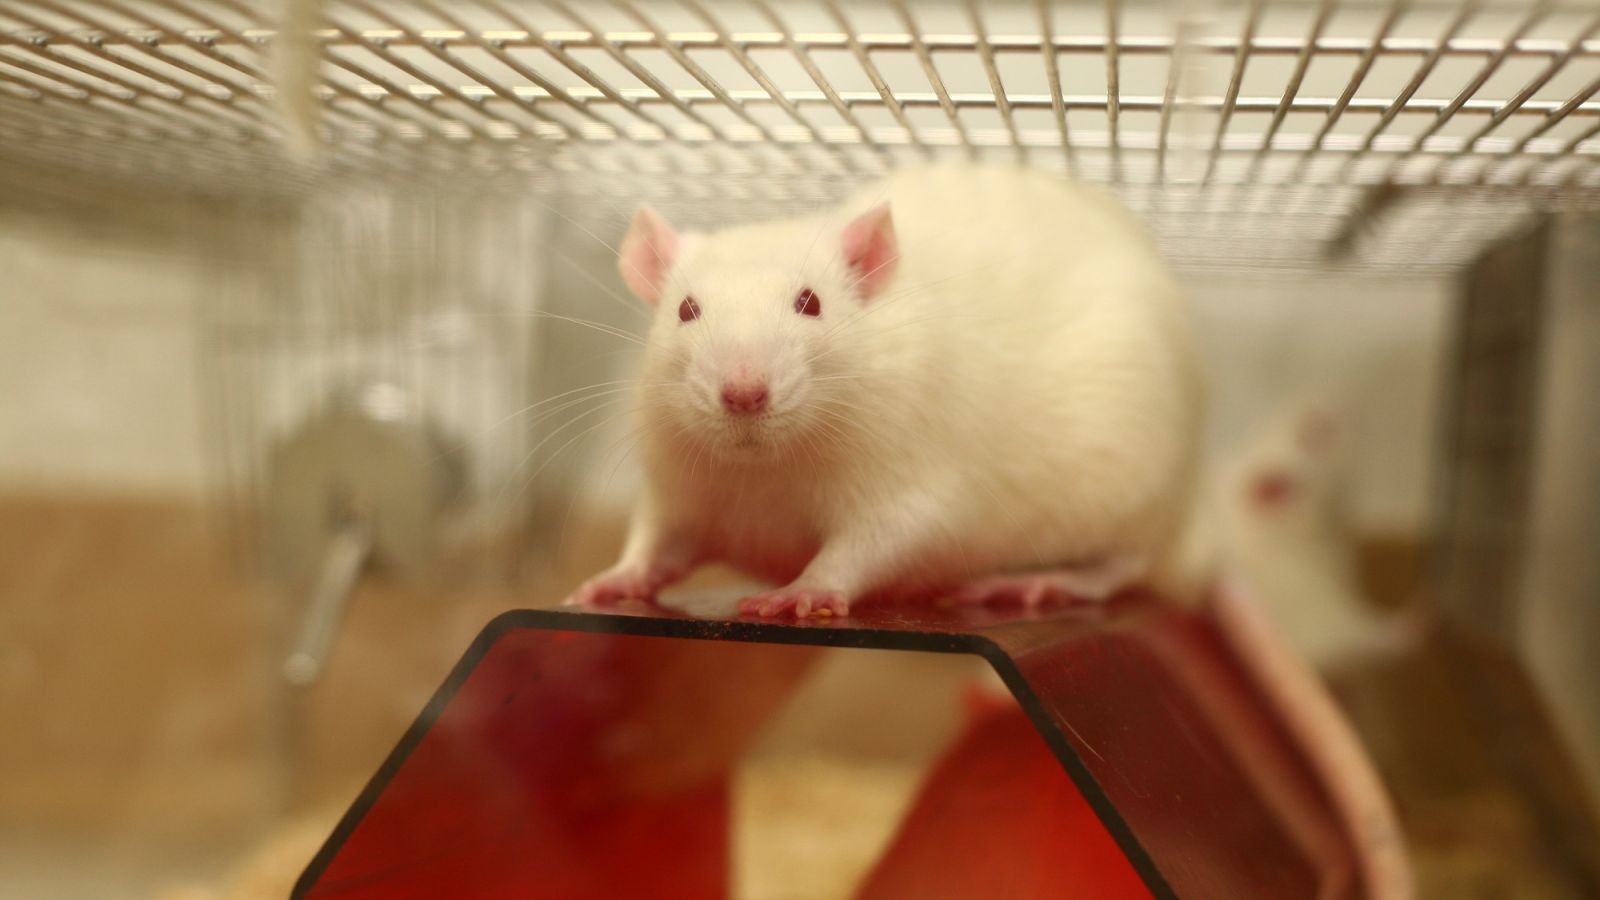 Hormone improves memory in rats